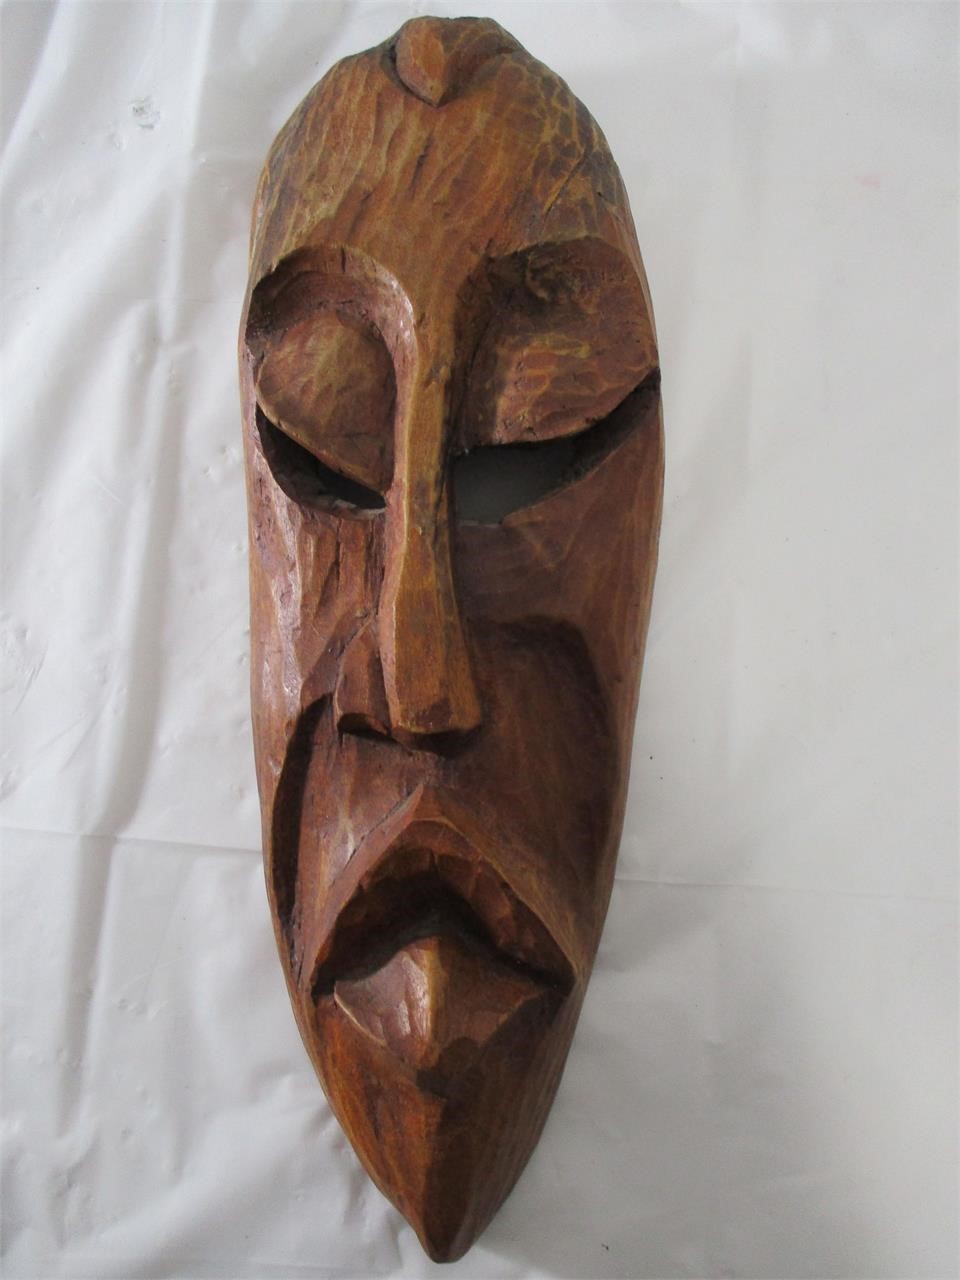 Wooden Mask Wall Hanging Decor